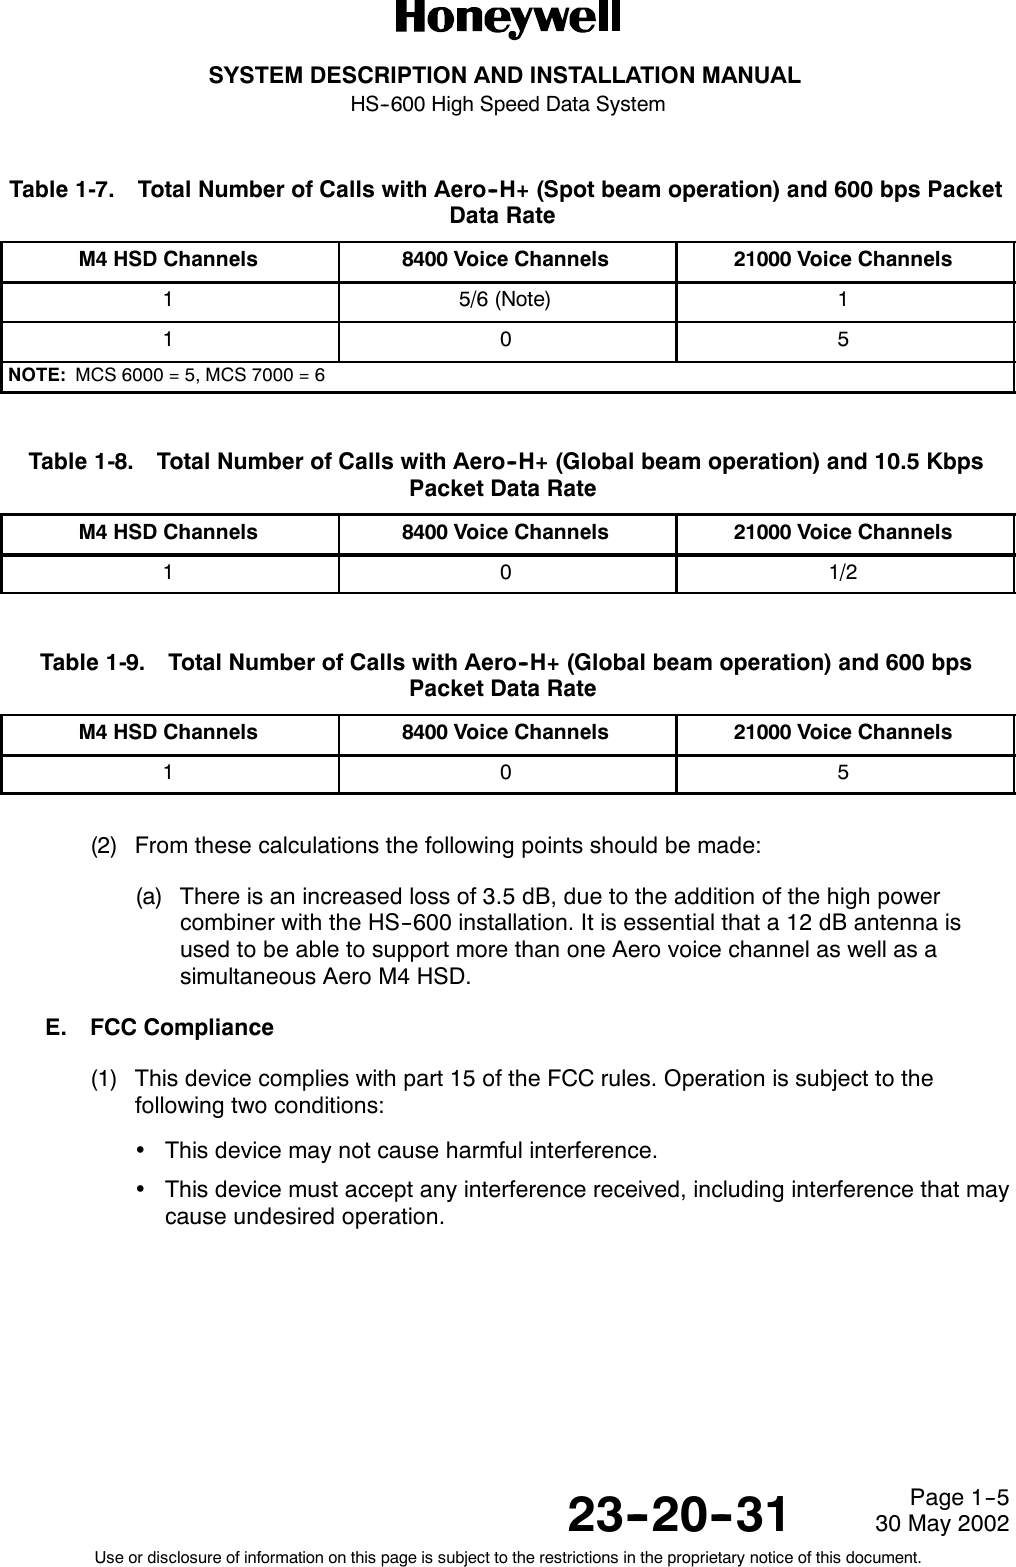 SYSTEM DESCRIPTION AND INSTALLATION MANUALHS--600 High Speed Data System23--20--3130 May 2002Use or disclosure of information on this page is subject to the restrictions in the proprietary notice of this document.Page 1--5Table 1-7. Total Number of Calls with Aero--H+ (Spot beam operation) and 600 bps PacketData RateM4 HSD Channels 8400 Voice Channels 21000 Voice Channels15/6 (Note) 1105NOTE: MCS 6000 = 5, MCS 7000 = 6Table 1-8. Total Number of Calls with Aero--H+ (Global beam operation) and 10.5 KbpsPacket Data RateM4 HSD Channels 8400 Voice Channels 21000 Voice Channels1 0 1/2Table 1-9. Total Number of Calls with Aero--H+ (Global beam operation) and 600 bpsPacket Data RateM4 HSD Channels 8400 Voice Channels 21000 Voice Channels105(2) From these calculations the following points should be made:(a) There is an increased loss of 3.5 dB, due to the addition of the high powercombiner with the HS--600 installation. It is essential that a 12 dB antenna isused to be able to support more than one Aero voice channel as well as asimultaneous Aero M4 HSD.E. FCC Compliance(1) This device complies with part 15 of the FCC rules. Operation is subject to thefollowing two conditions:•This device may not cause harmful interference.•This device must accept any interference received, including interference that maycause undesired operation.